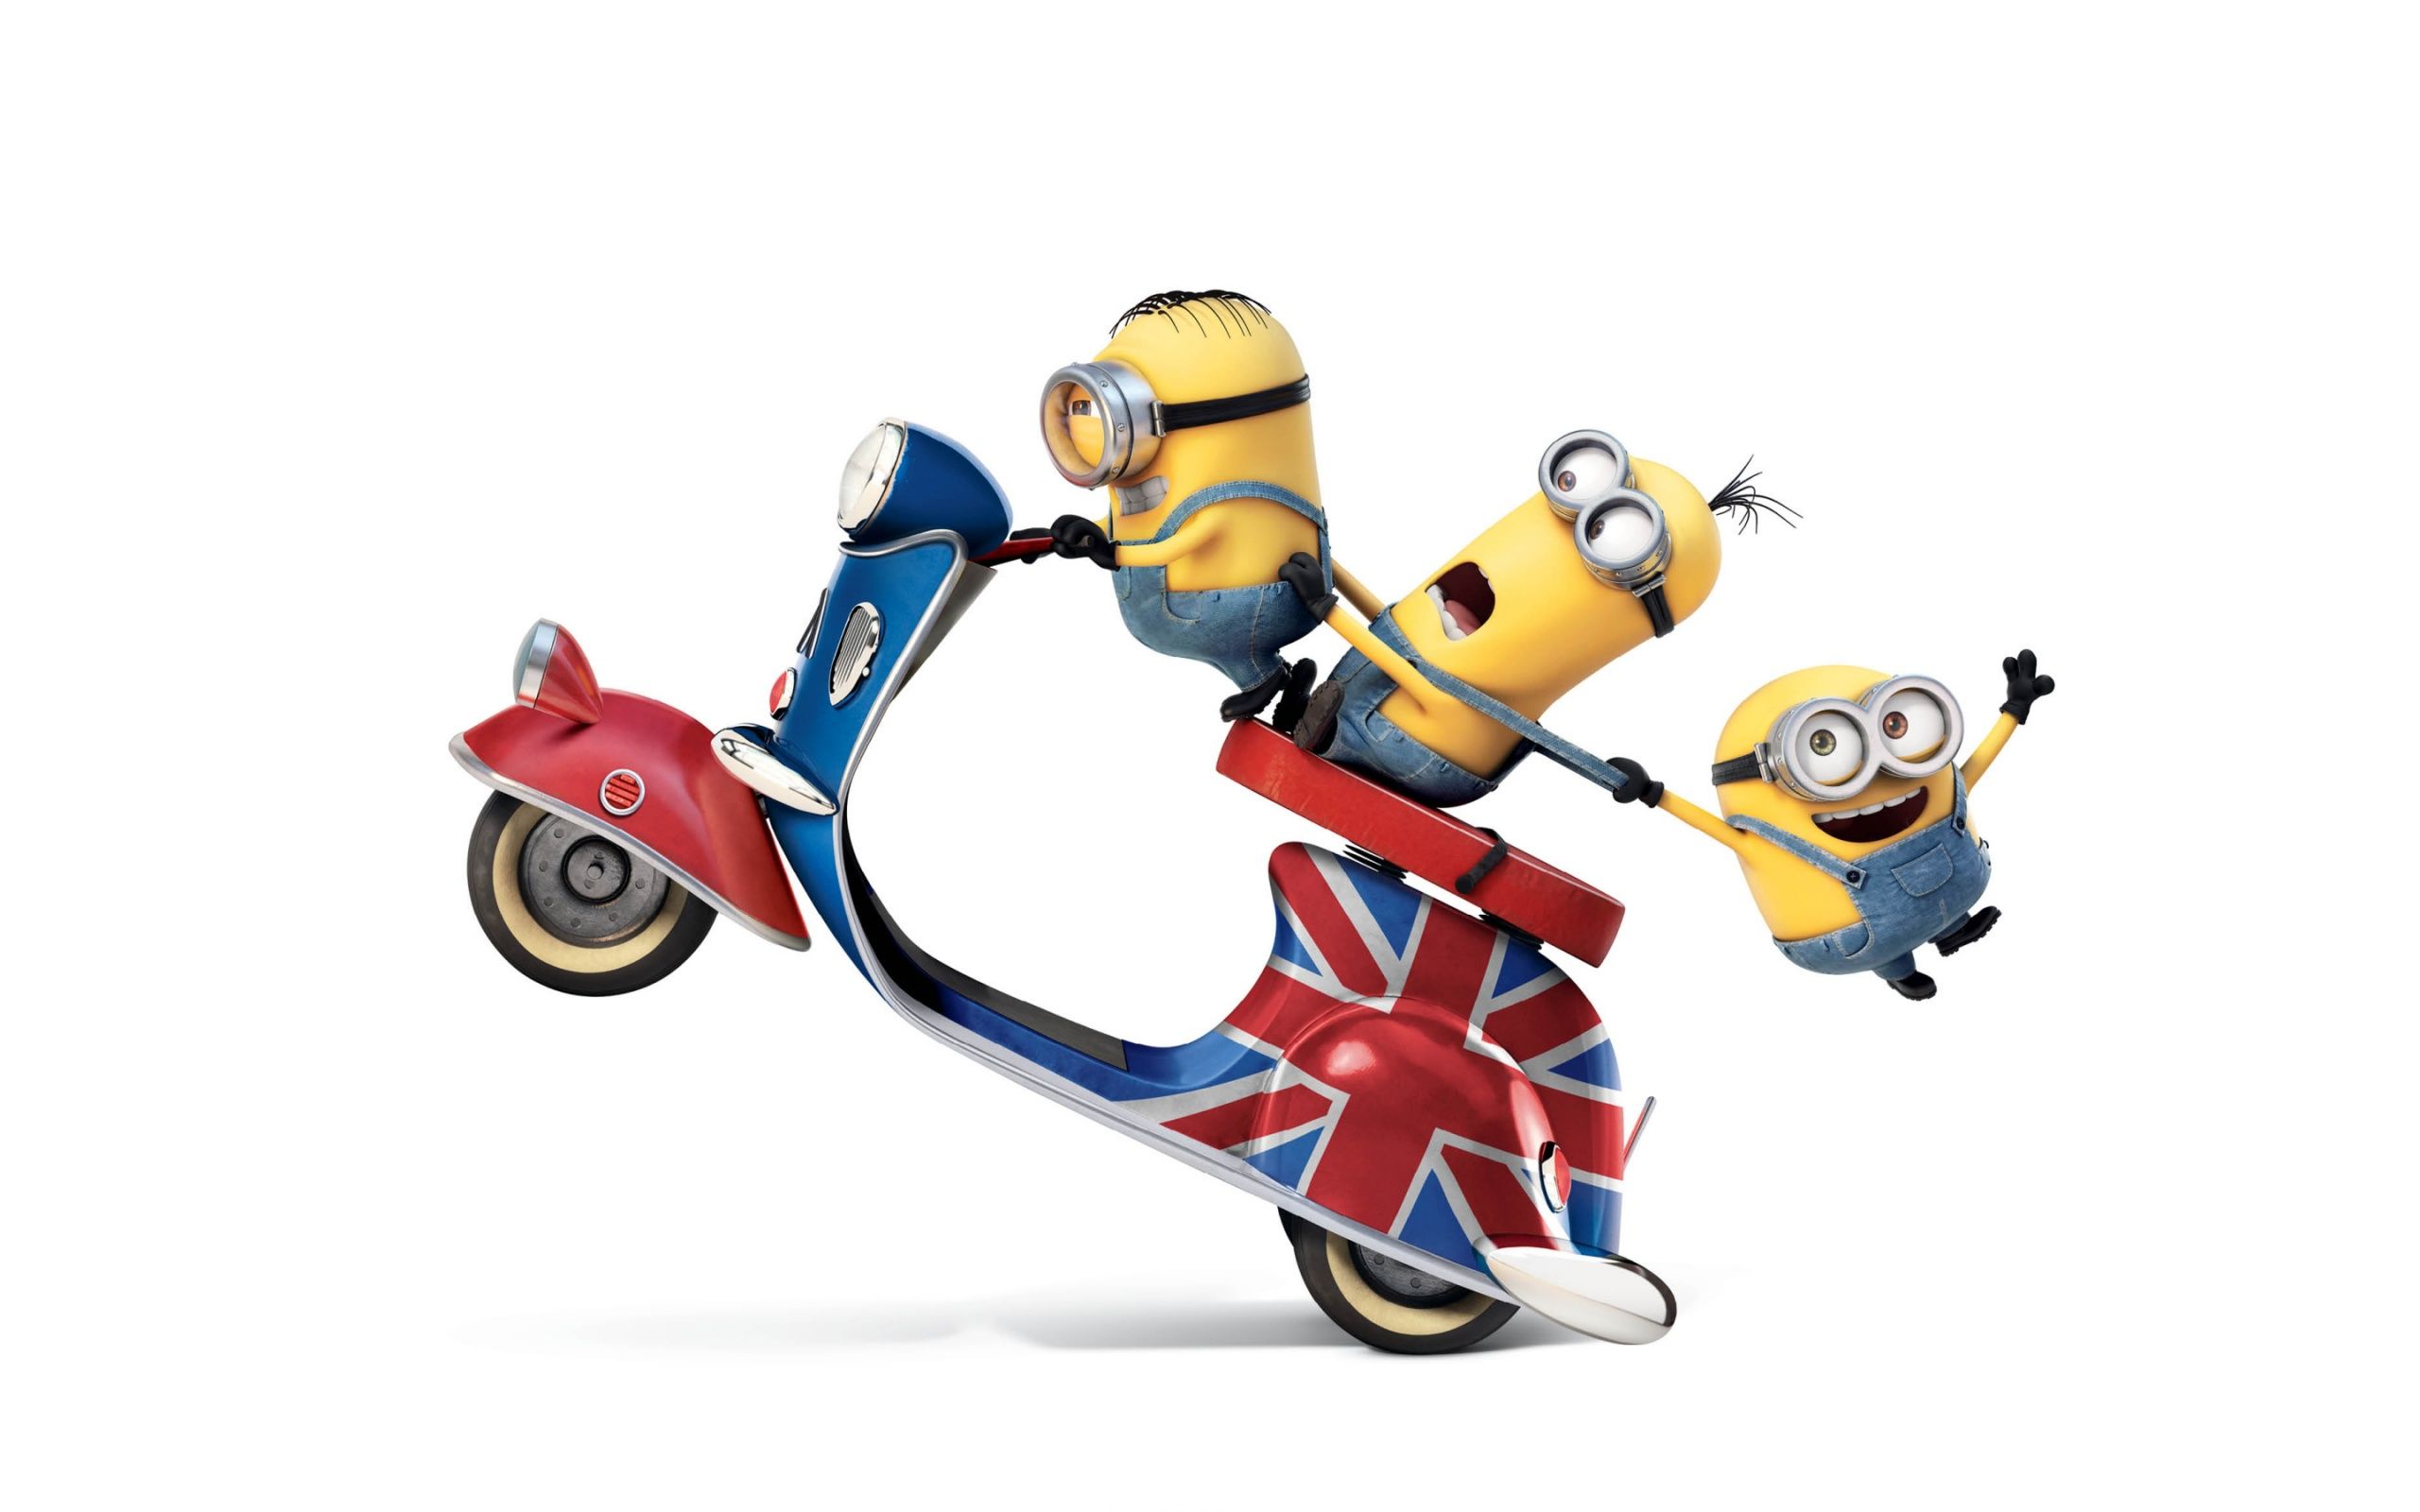 Funny Minions Wallpaper in jpg format for free download